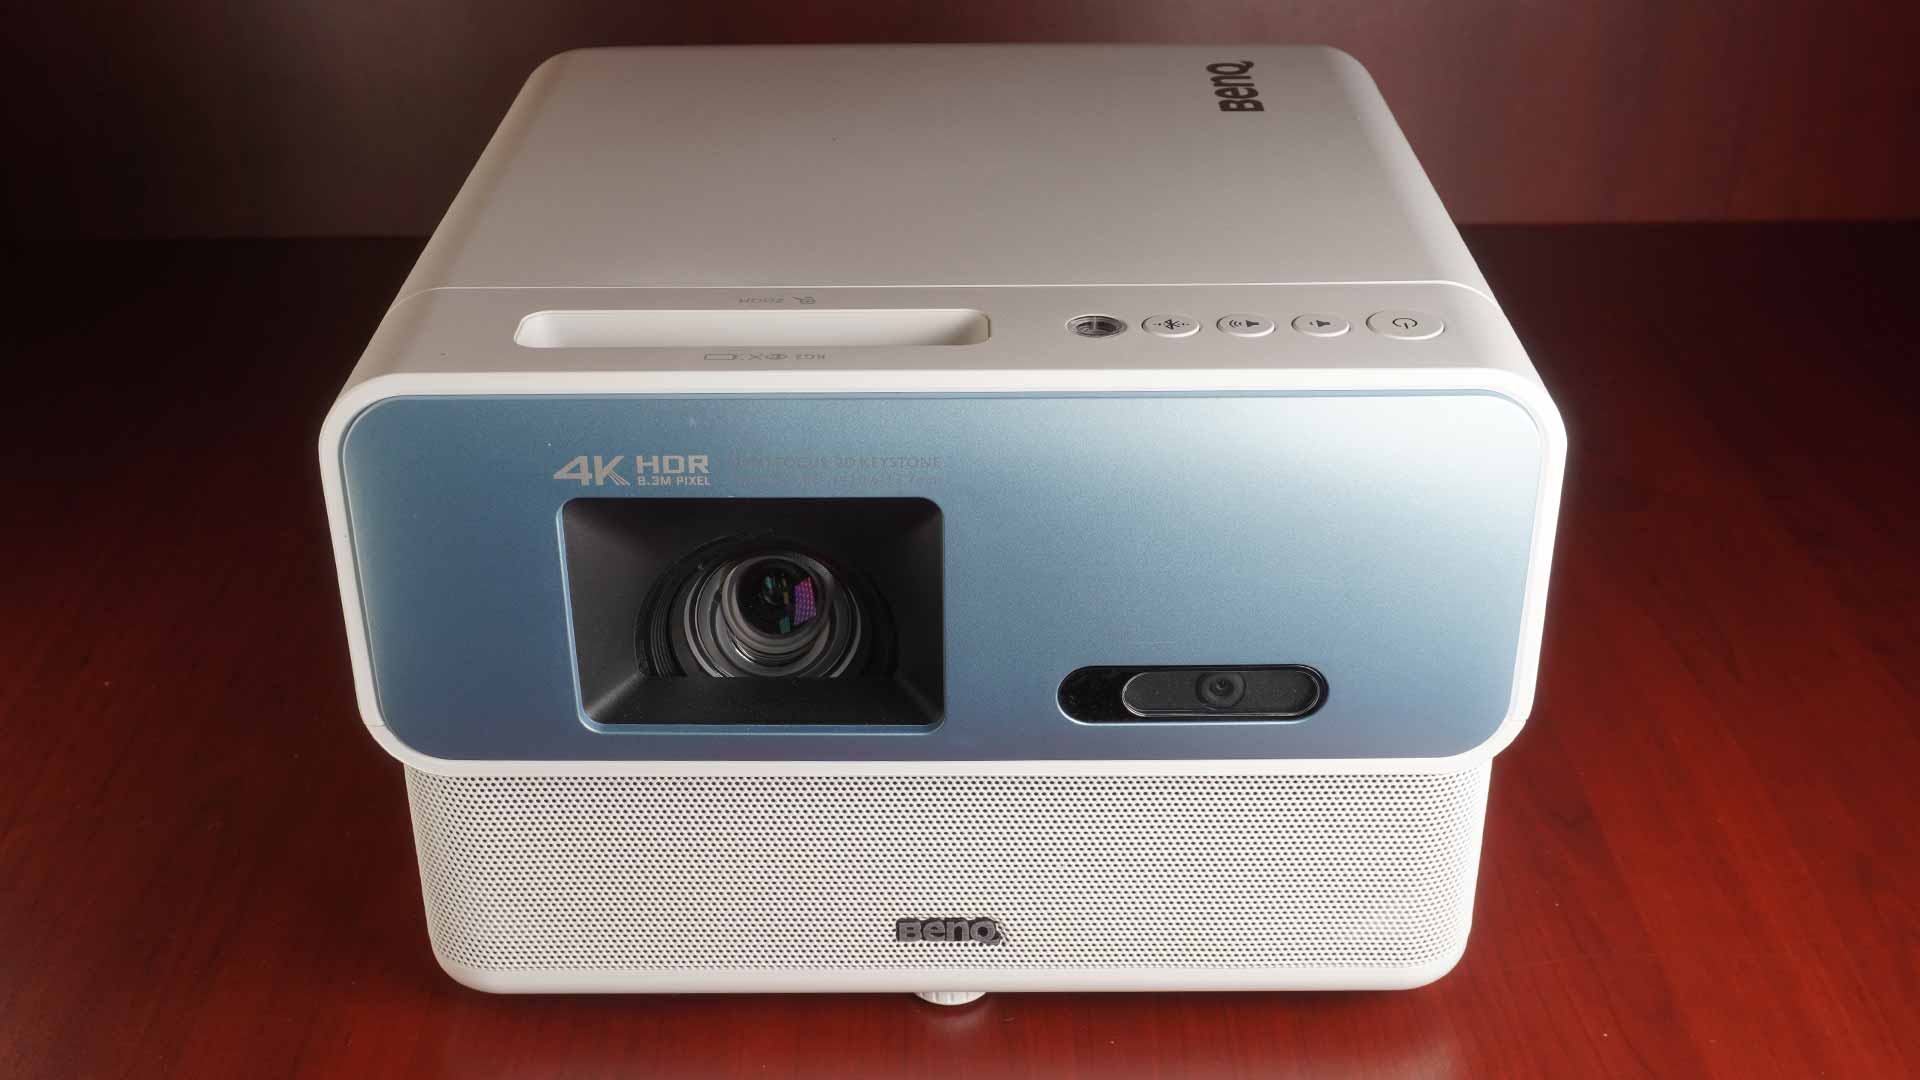 Benq Gp500 Projector Chassis - Projector Reviews - Image